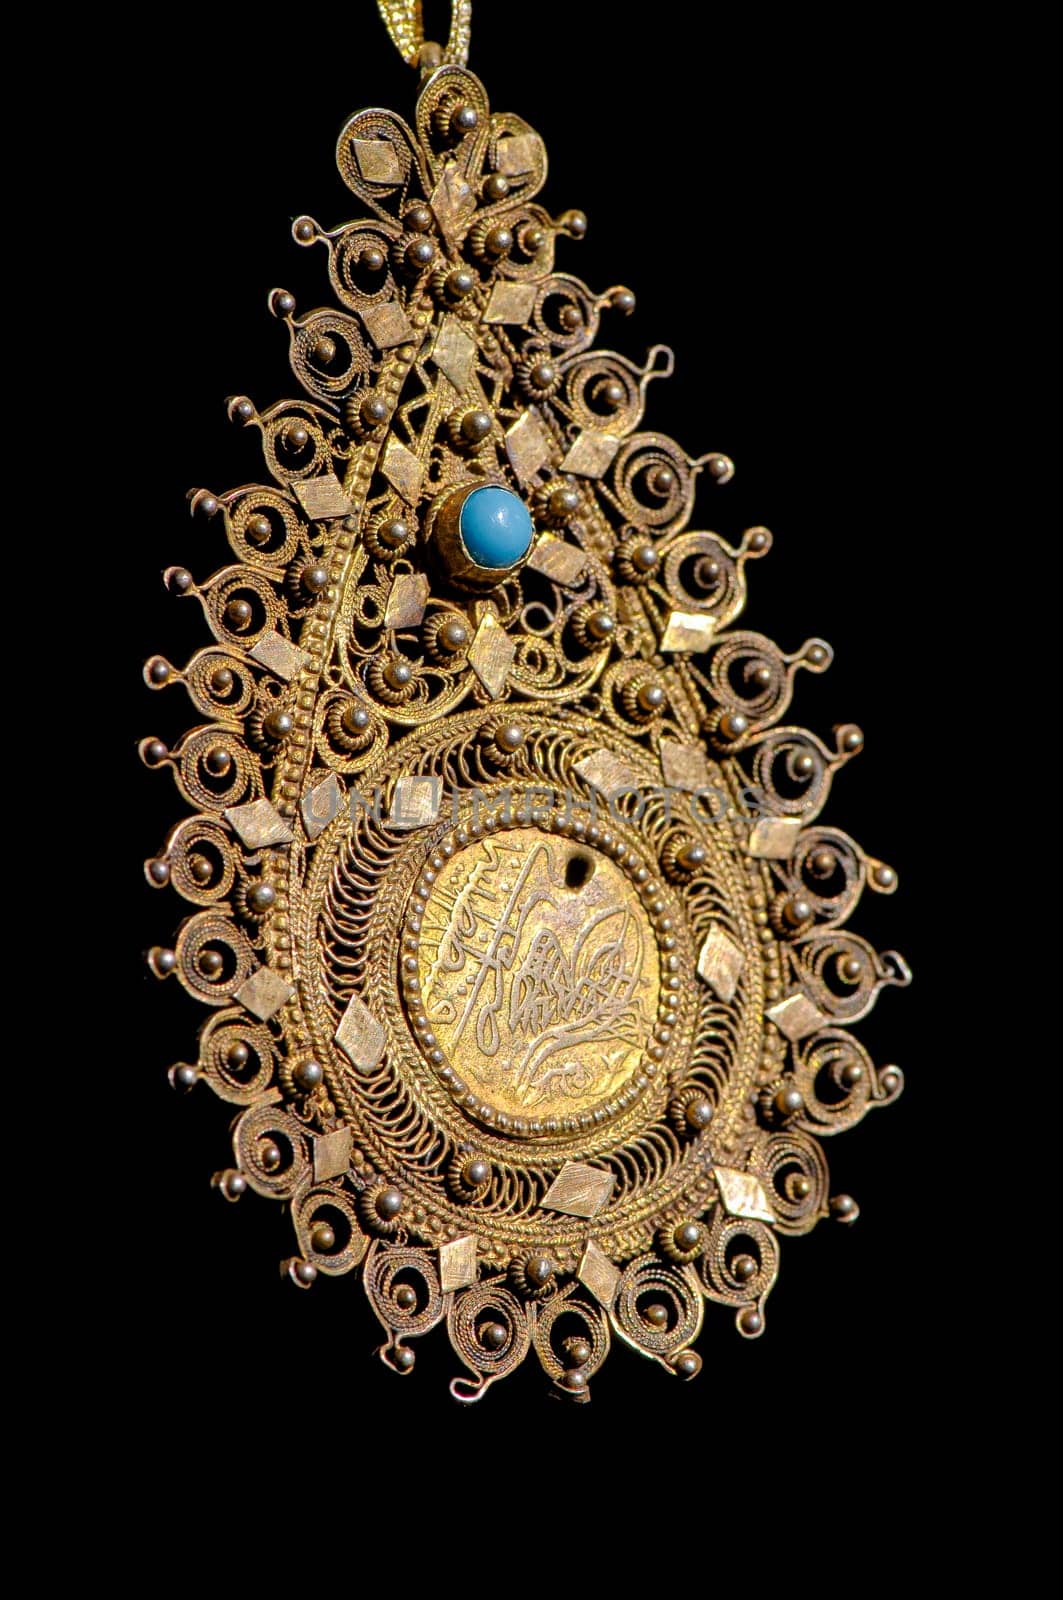 A Vintage, fancy jewelry pendant with precious stones isolated on a black background, vertical